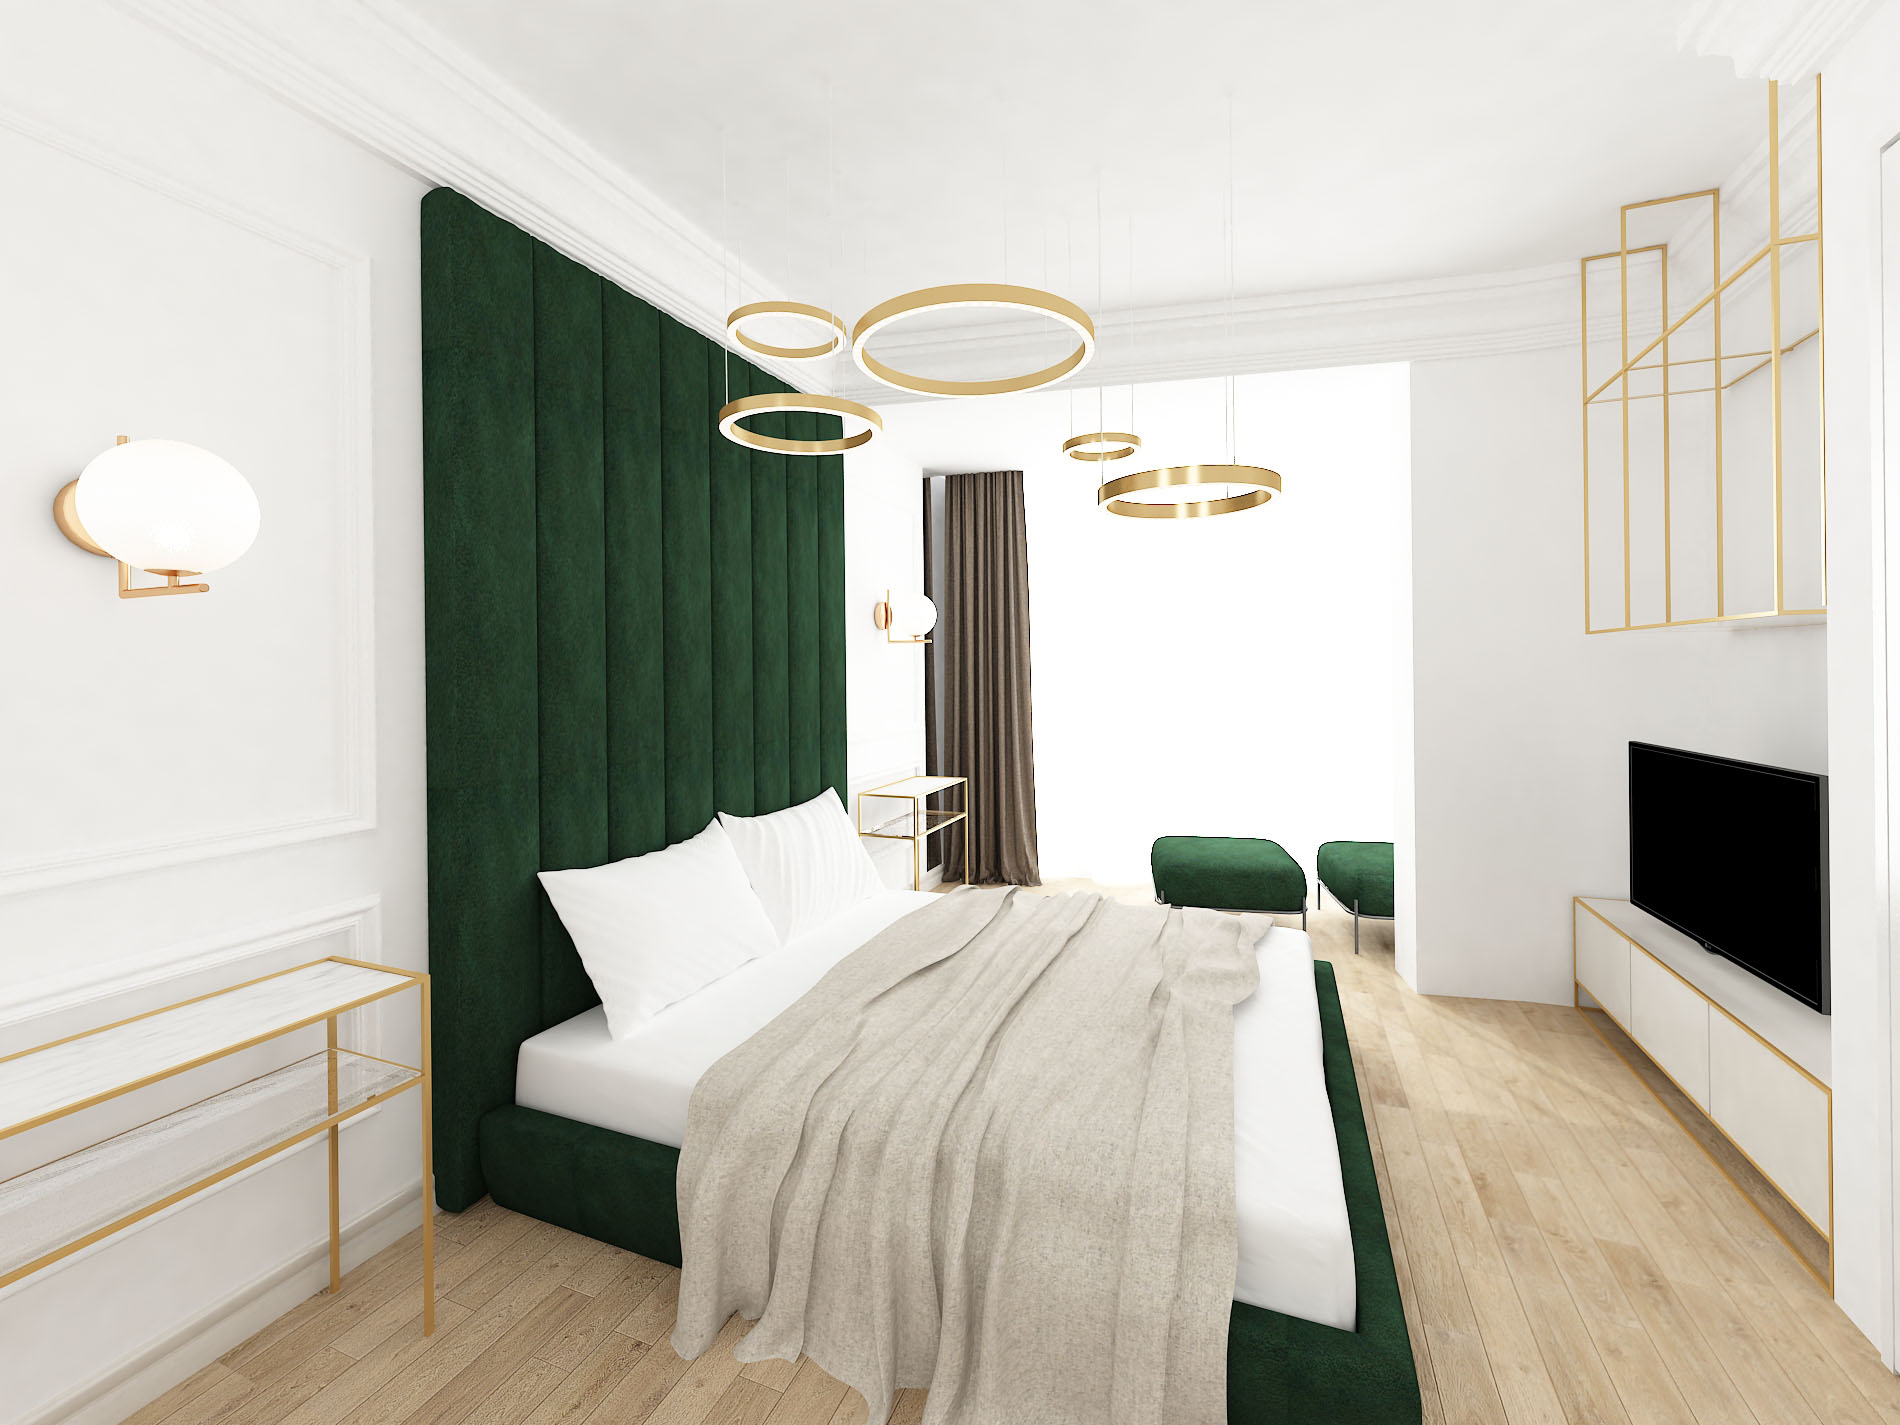 Contemporary bedroom with classical elements and details in dark green and gold.